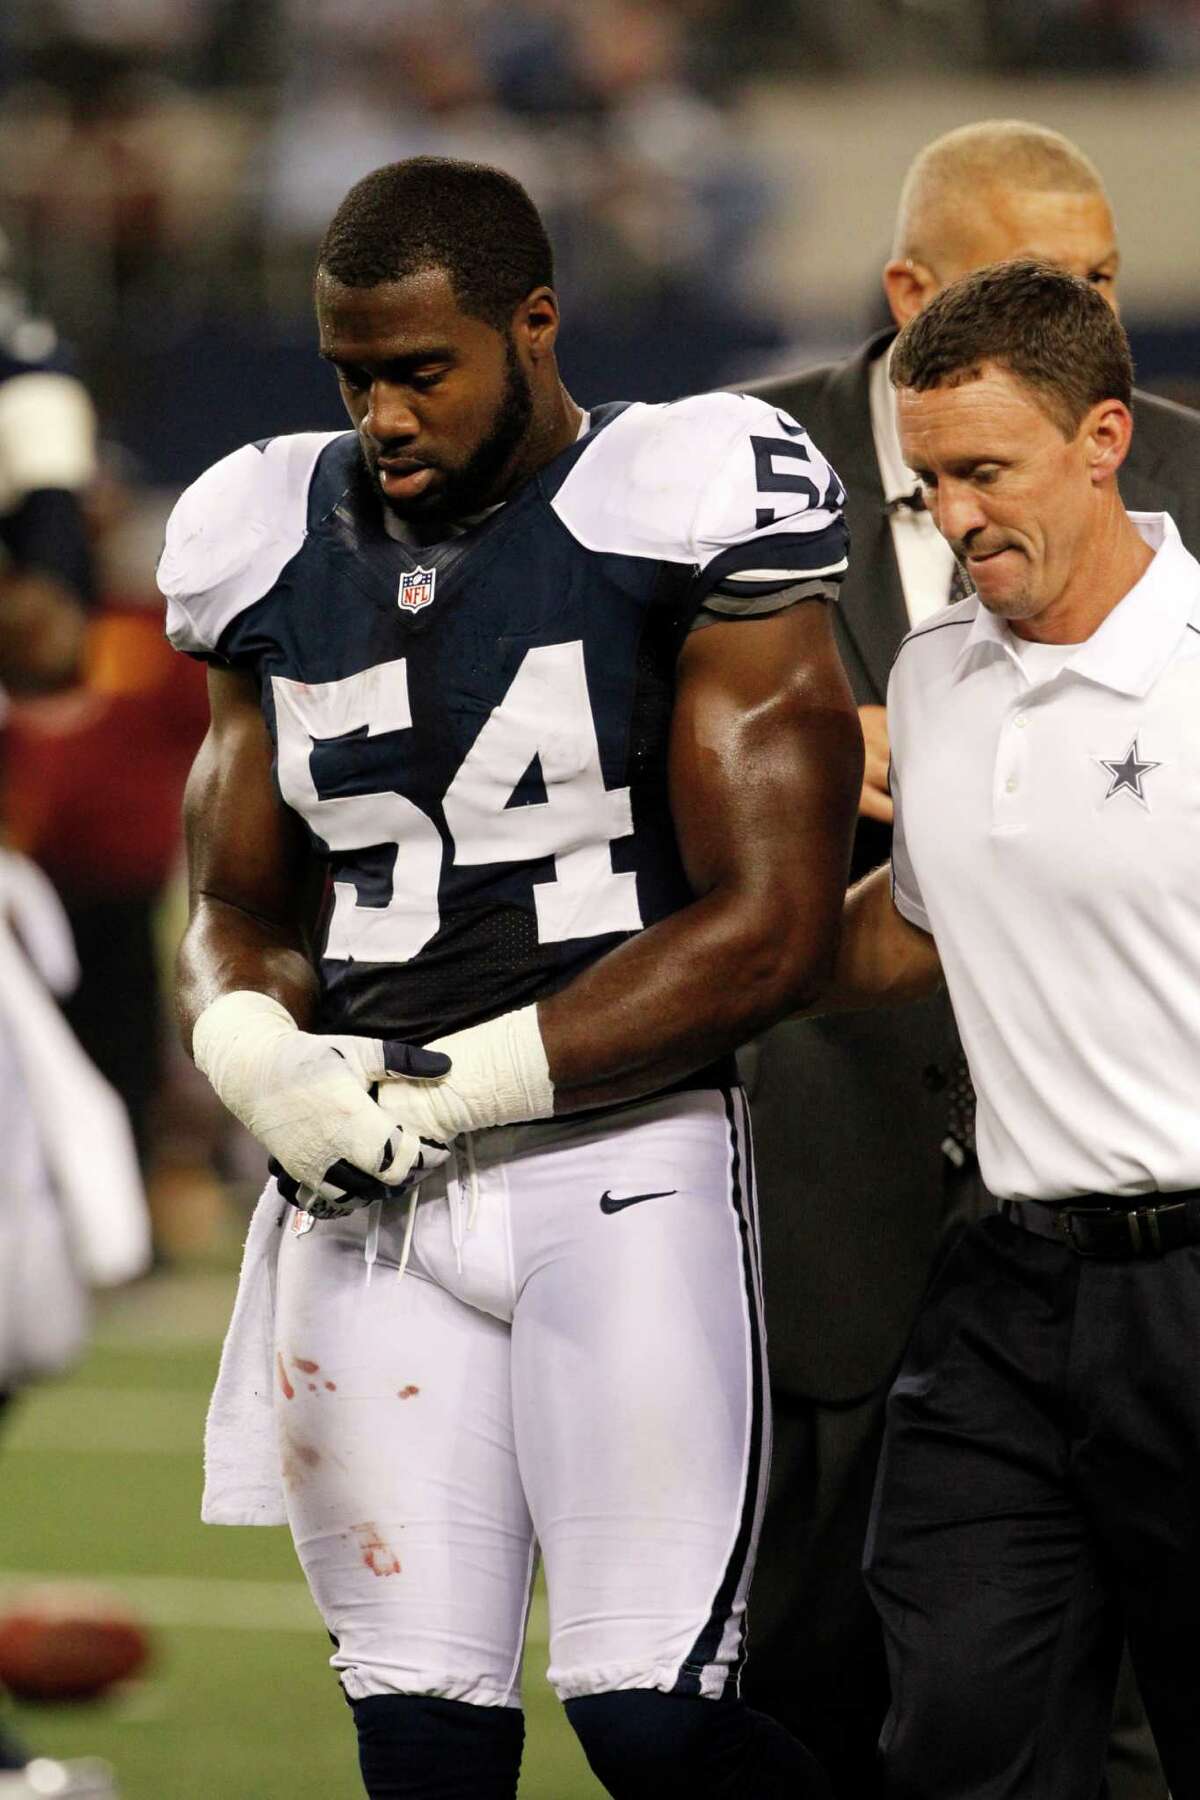 Dallas Cowboys inside linebacker Bruce Carter was placed on season-ending injured reserve after suffering a dislocated left elbow on Thanksgiving Day.